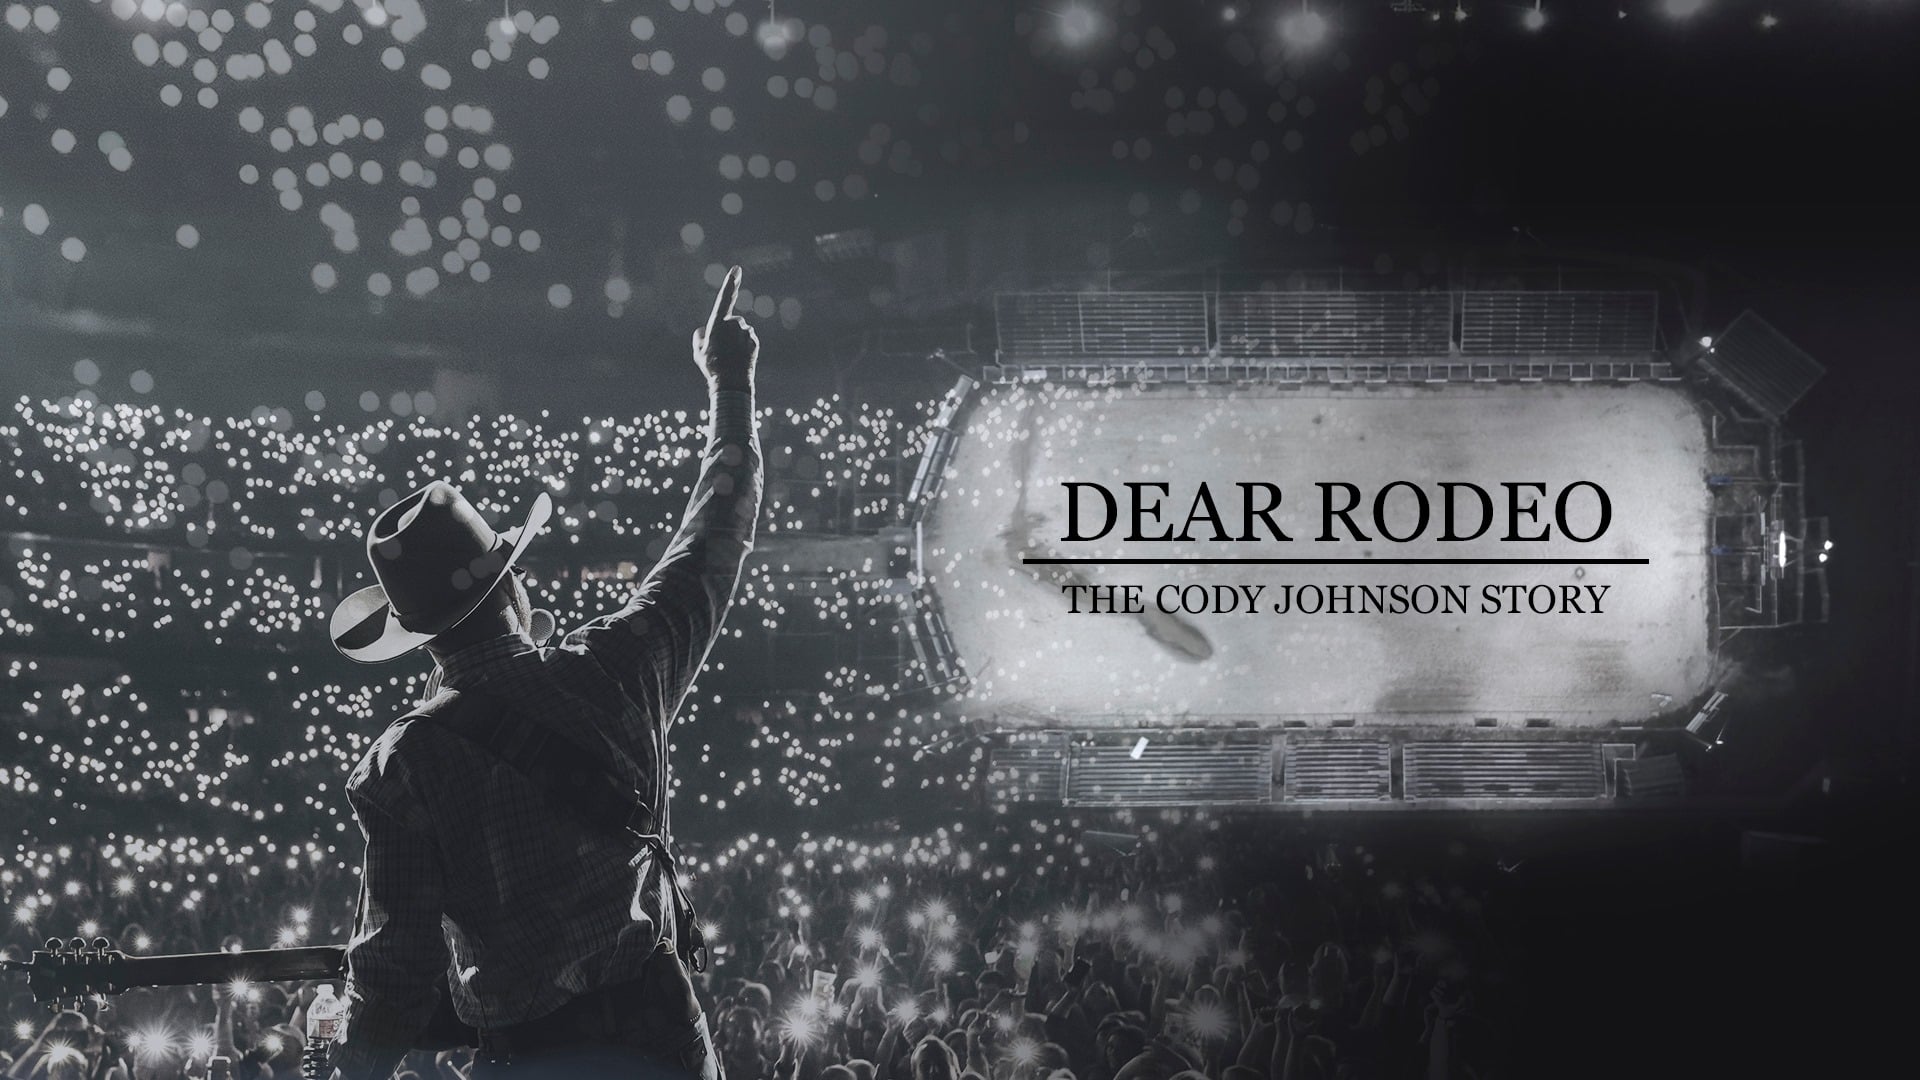 Cody Johnson wins team roping event after previously leaving the rodeo world behind. He reflected on his rodeo past in his 2021 documentary "Dear Rodeo: The Cody Johnson Story"